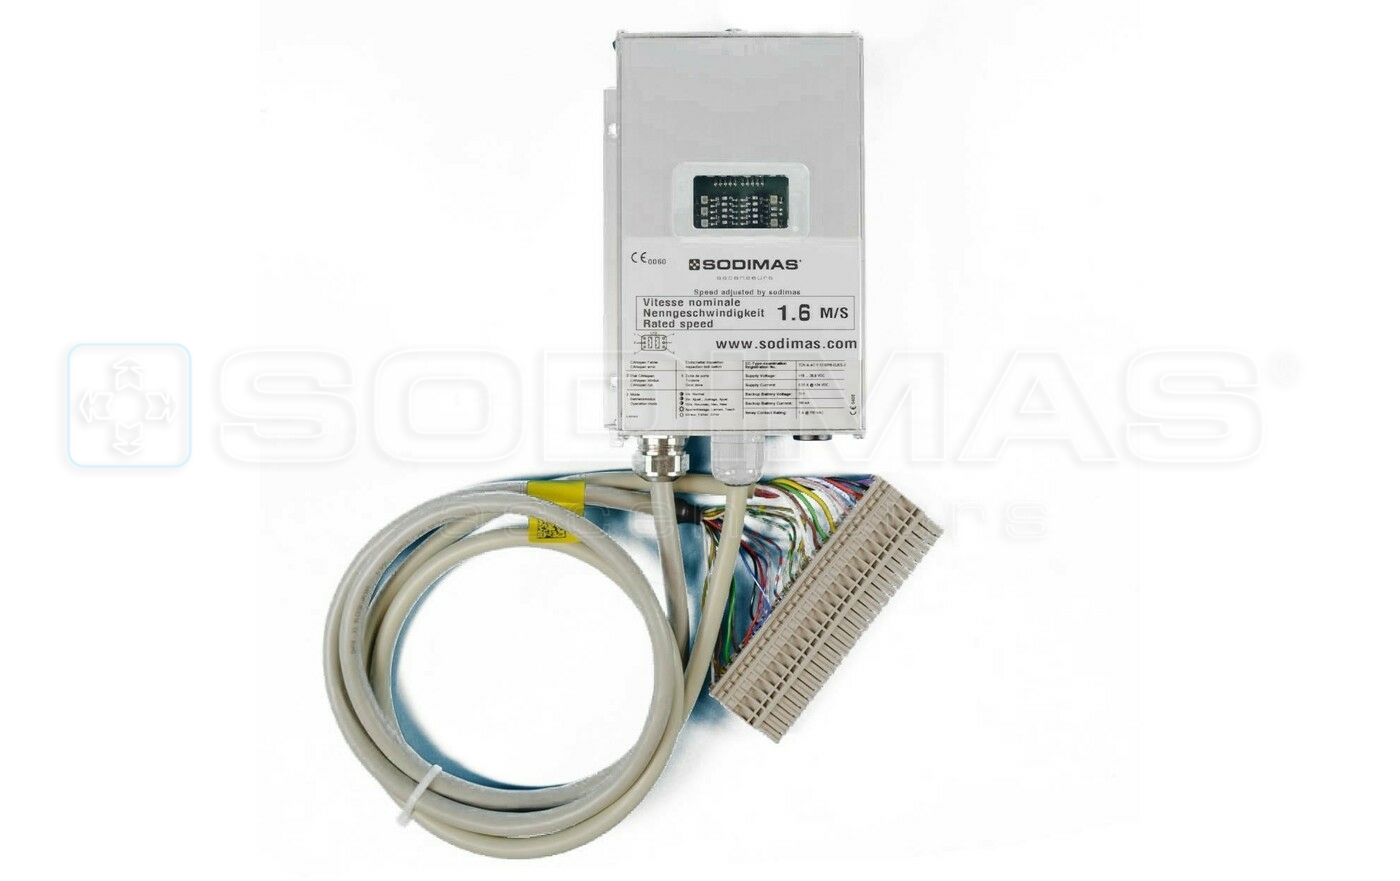 Boîtier Solimax 1,0 m/s QItouch